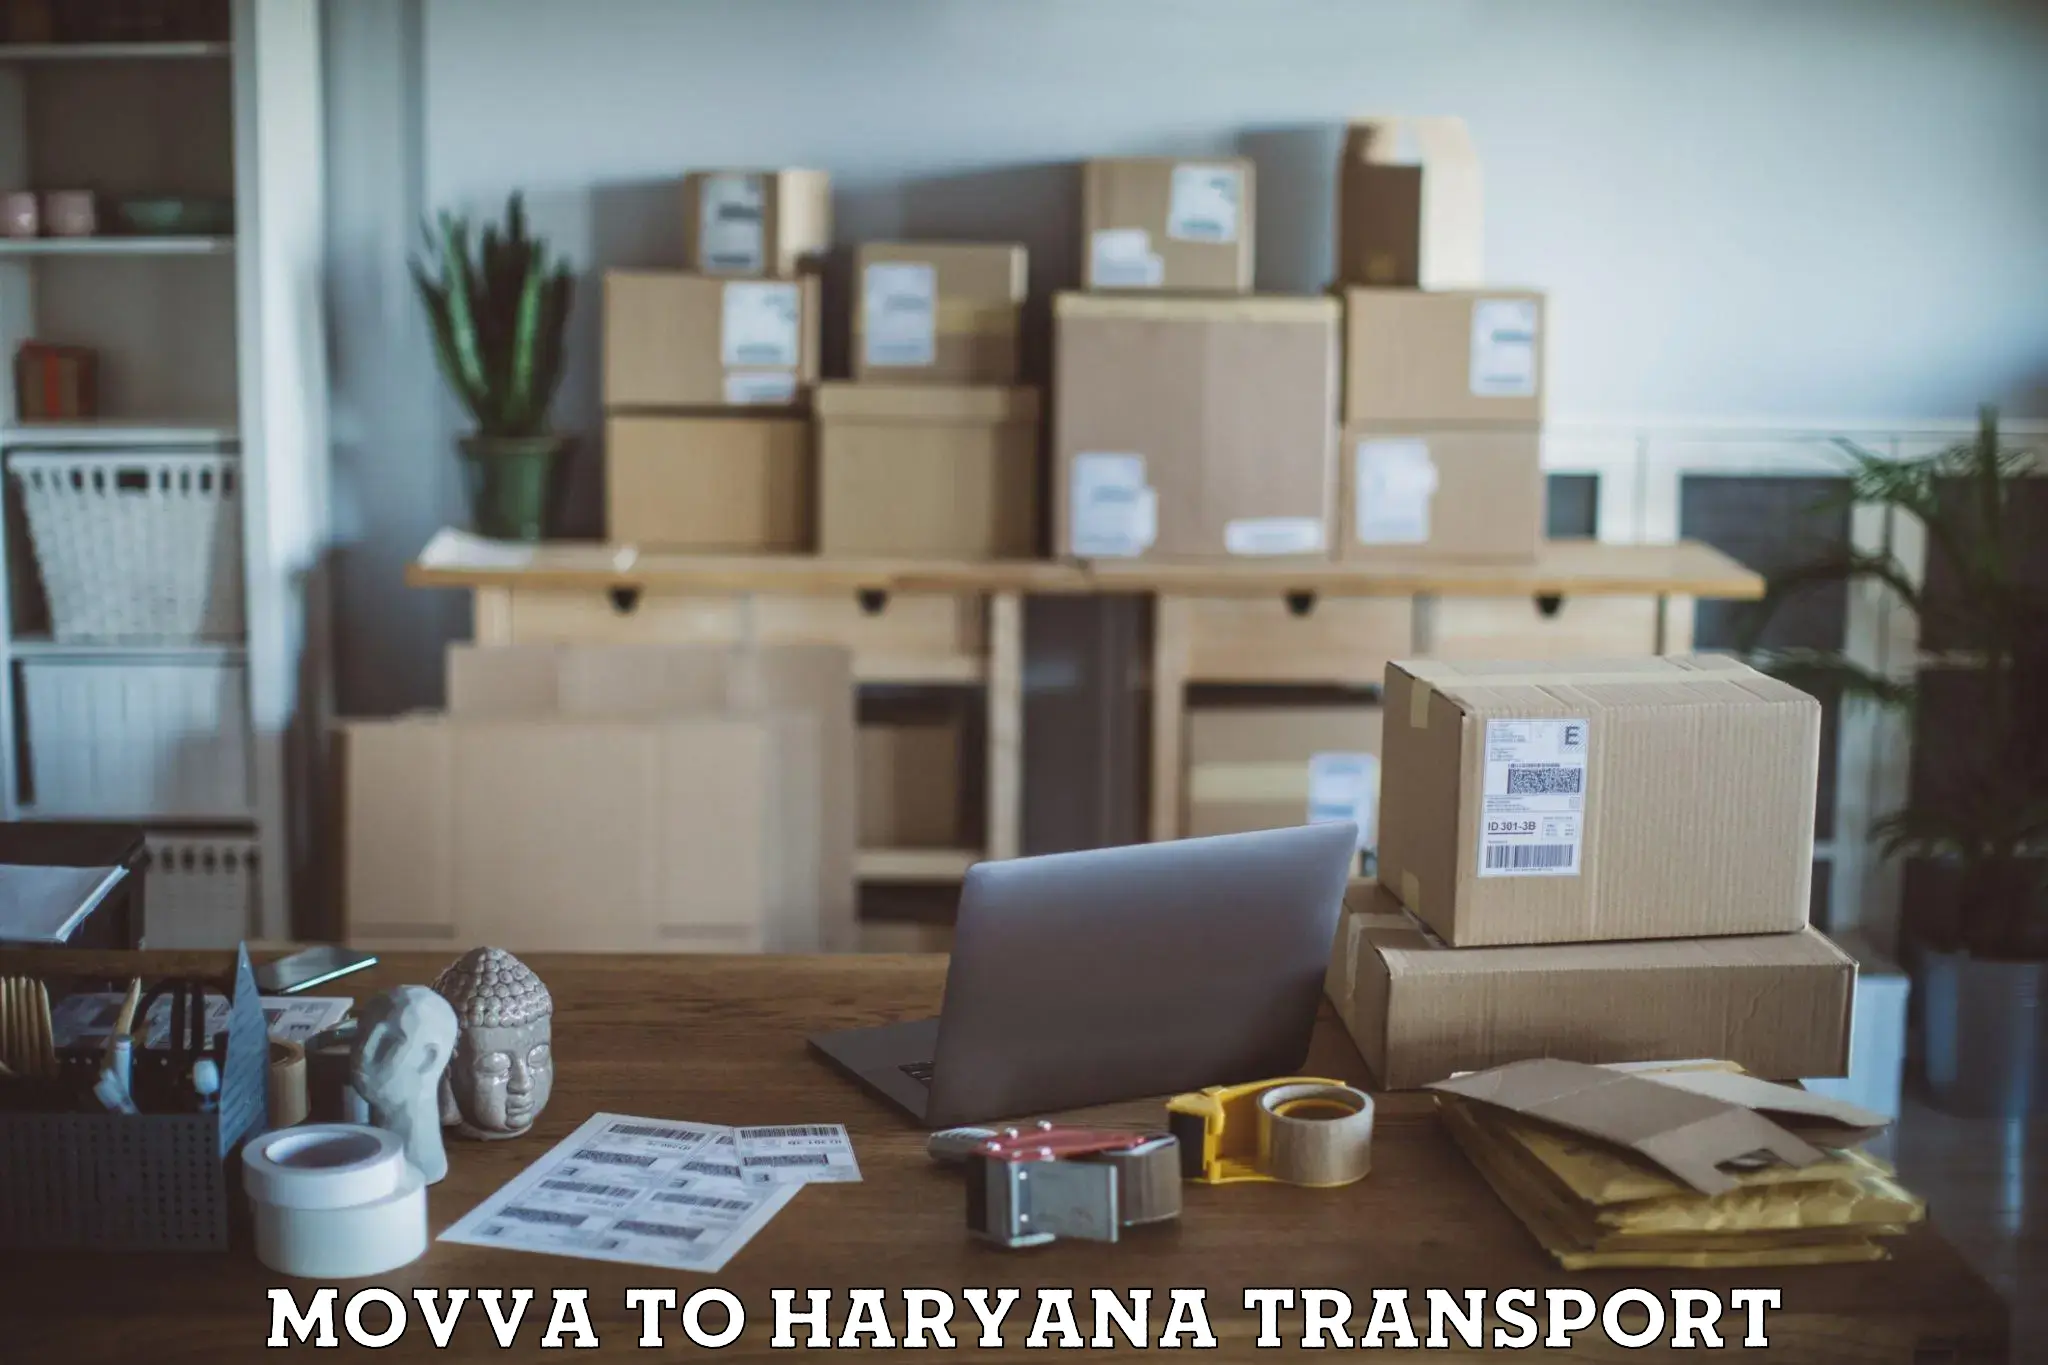 Vehicle transport services Movva to Gurgaon